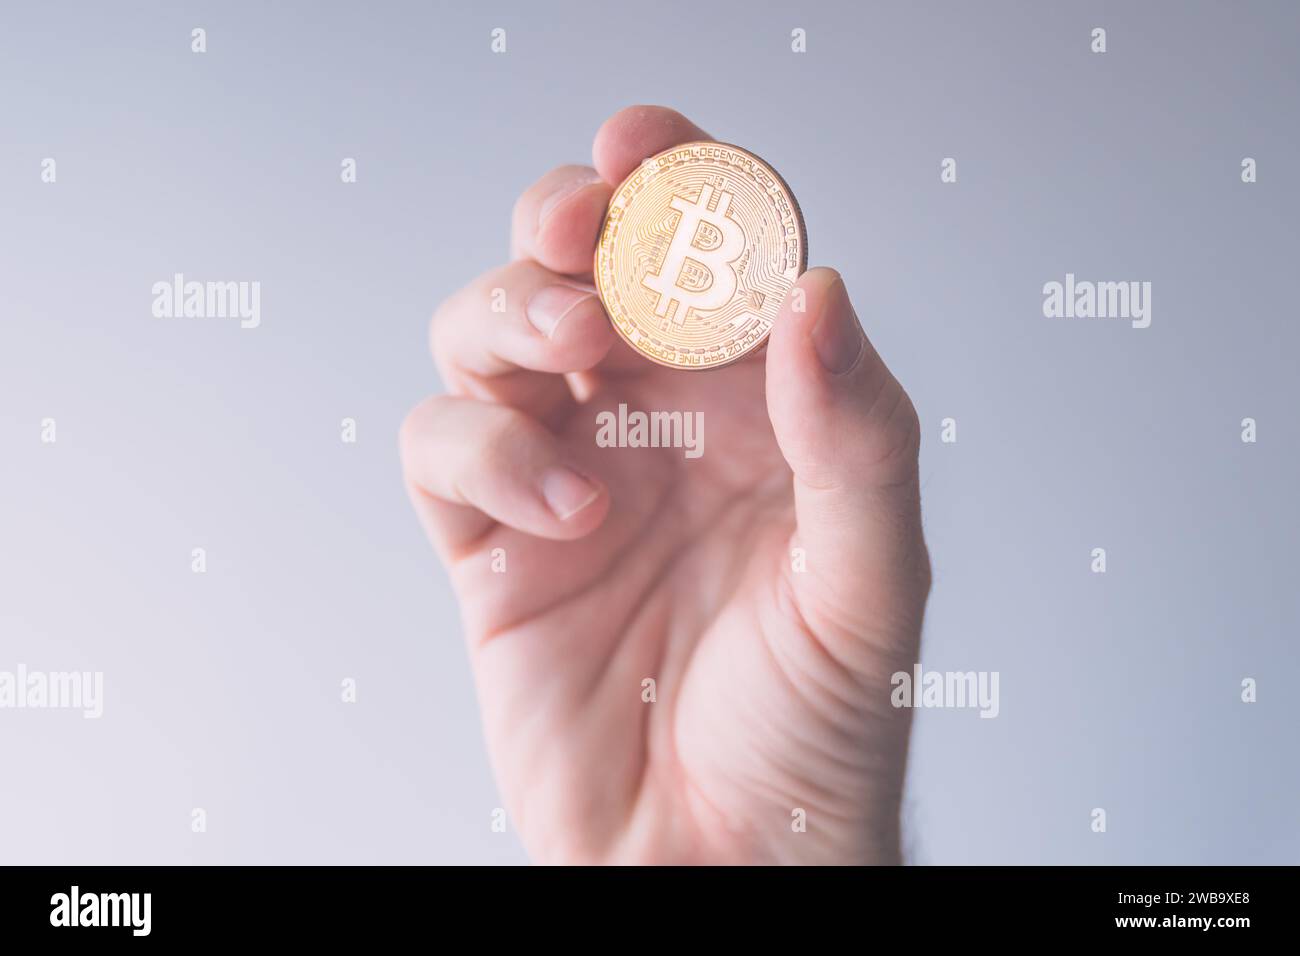 Cryptocurrency trader holding bitcoin BTC coin, business finance and economy concept with selective focus Stock Photo